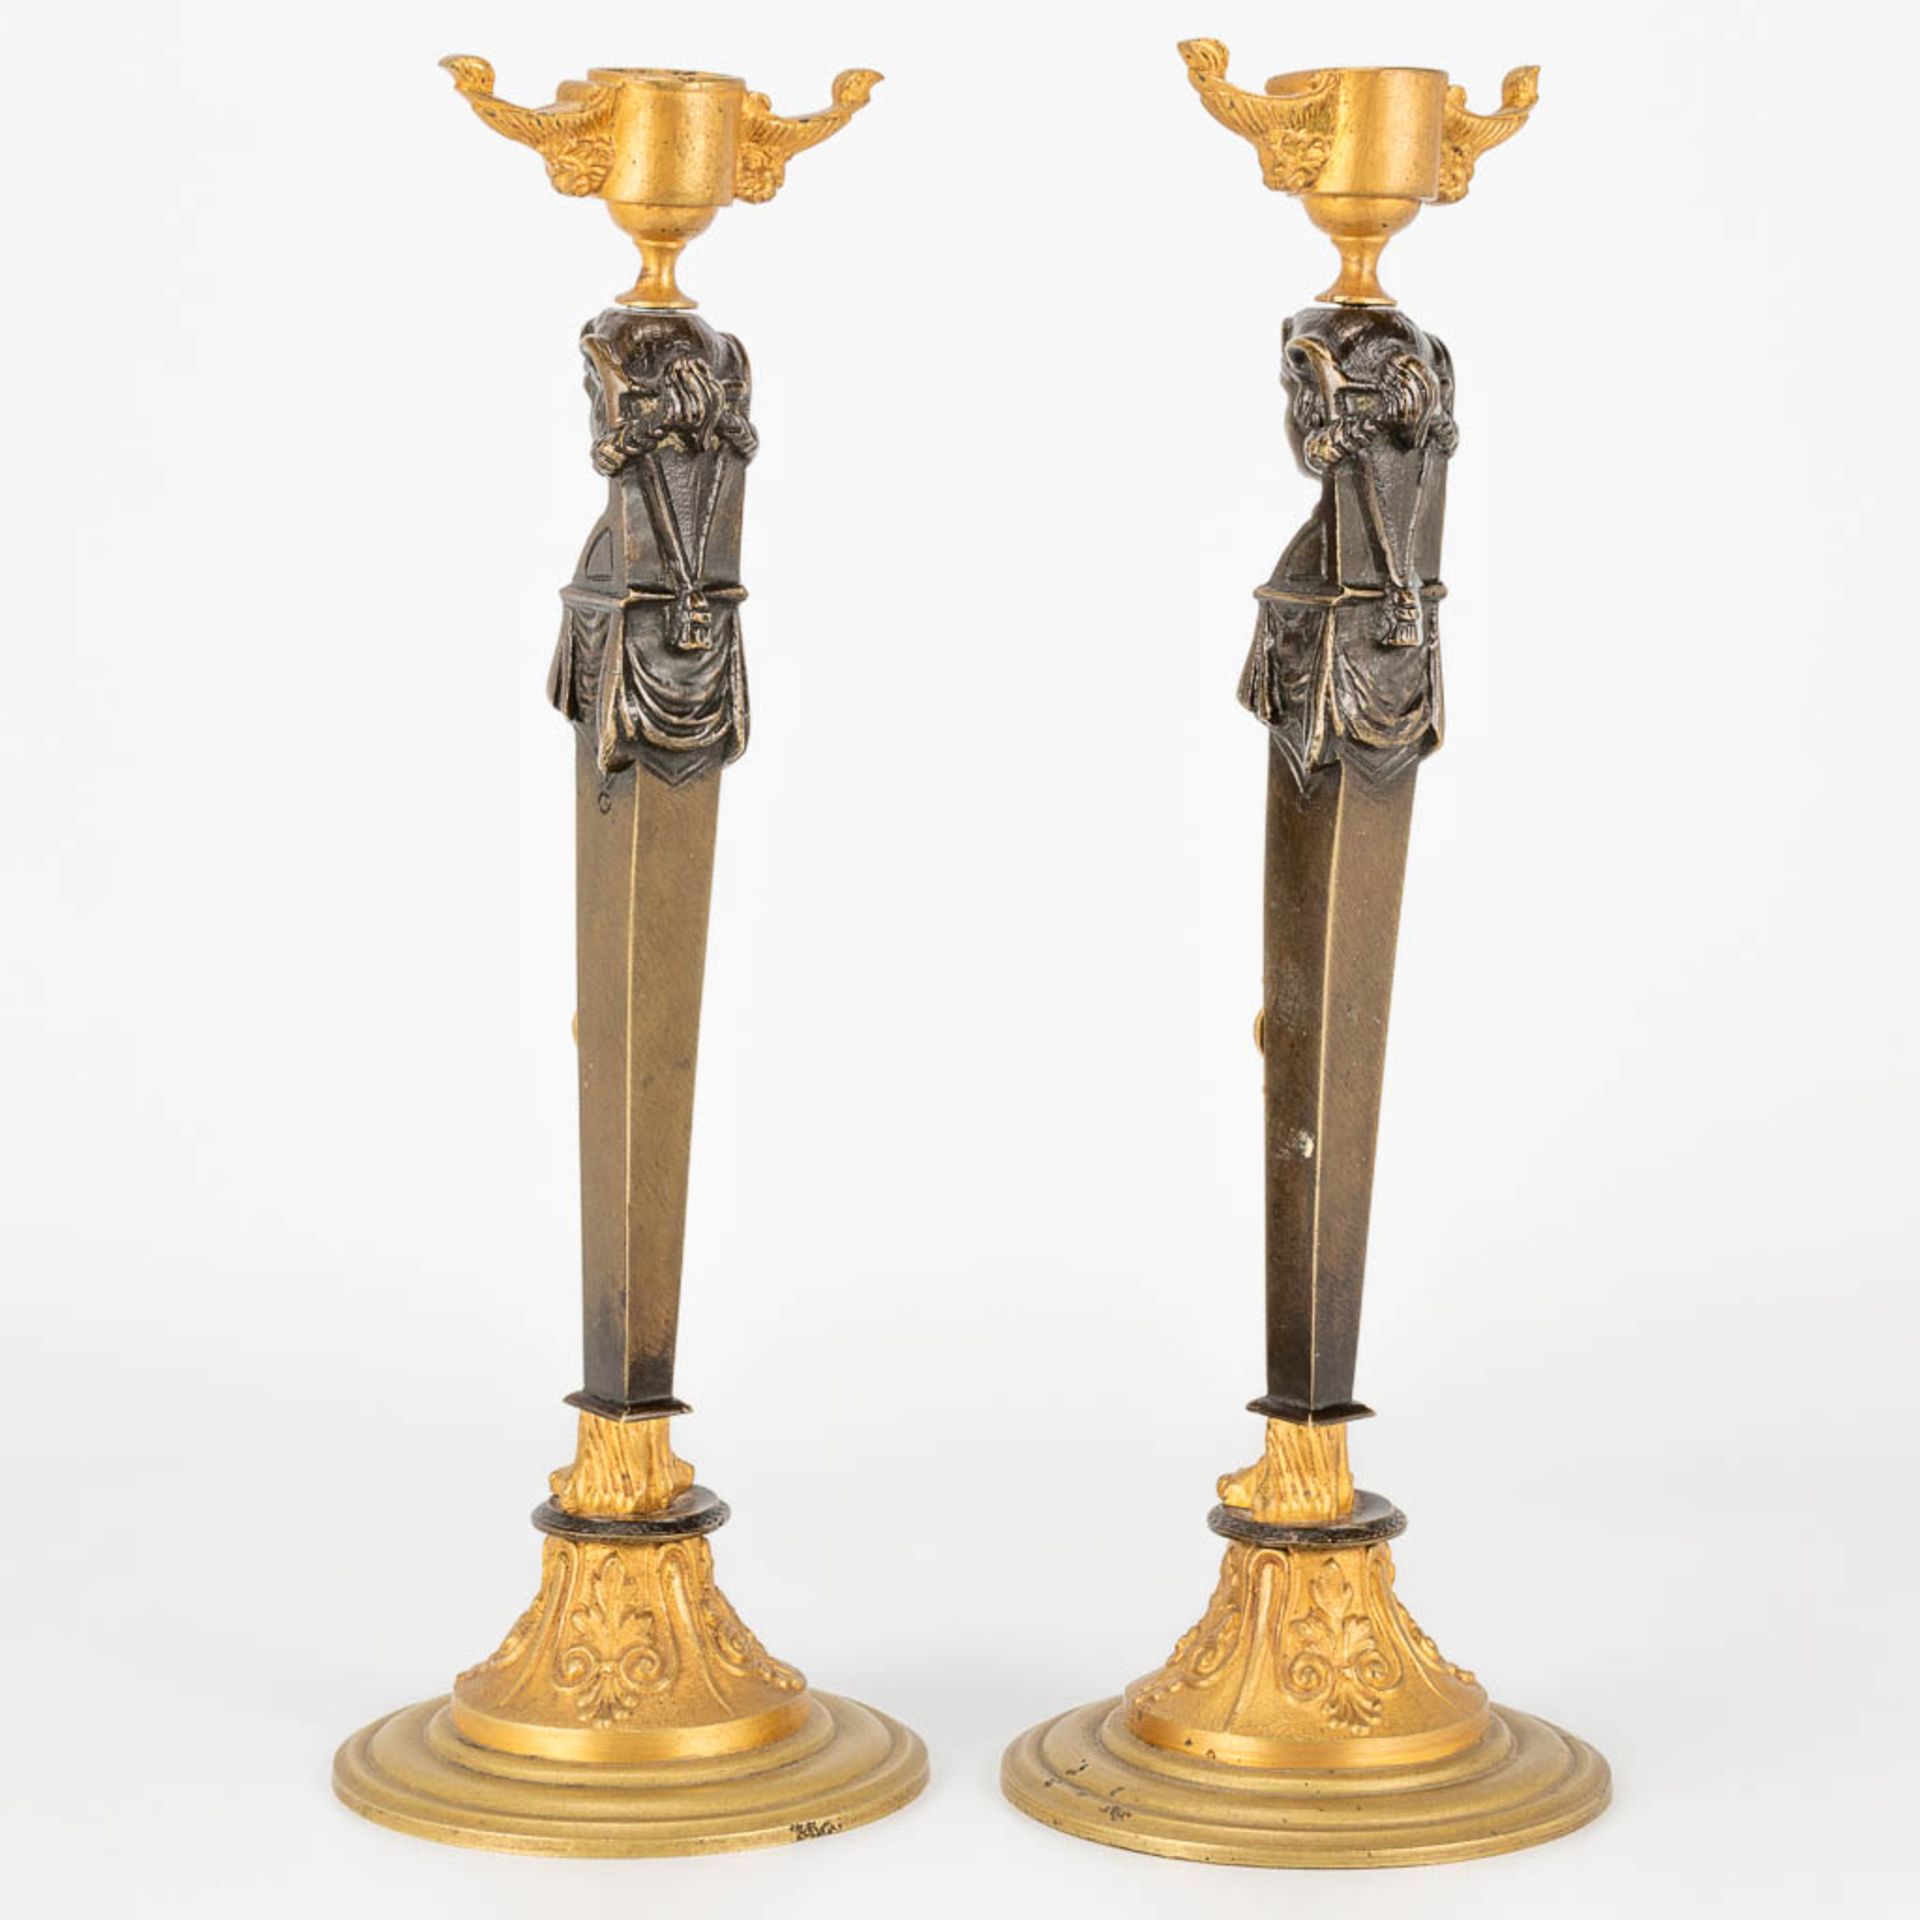 A pair of candlesticks made of gilt and patinated bronze in empire style. (27,5 x 9,5 cm) - Image 4 of 15